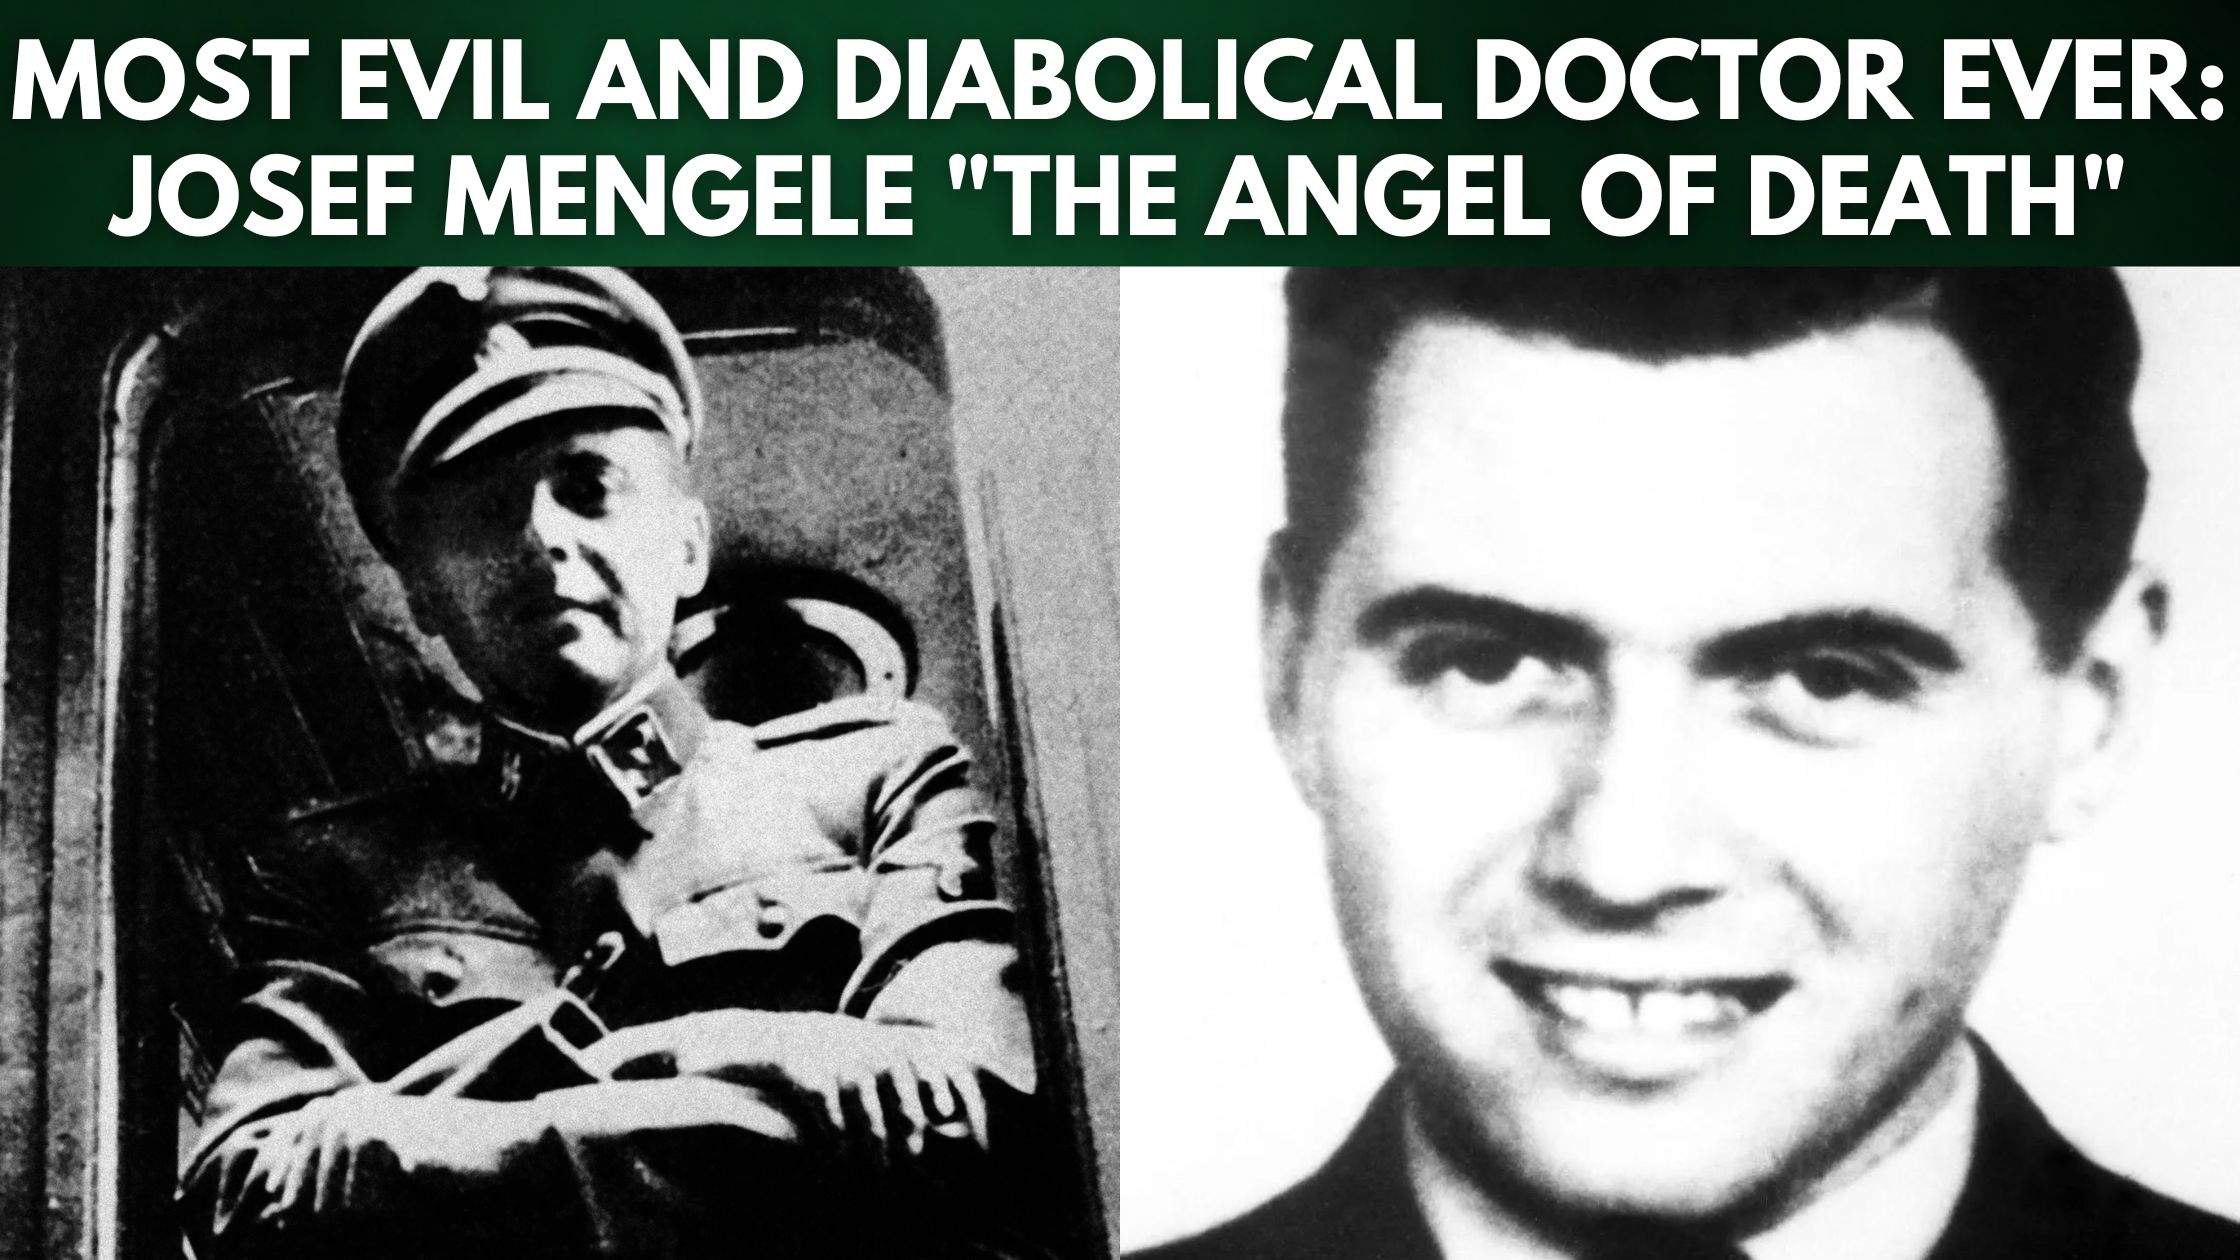 Meet The Most Evil And Diabolical Doctor Ever Josef Mengele (1)